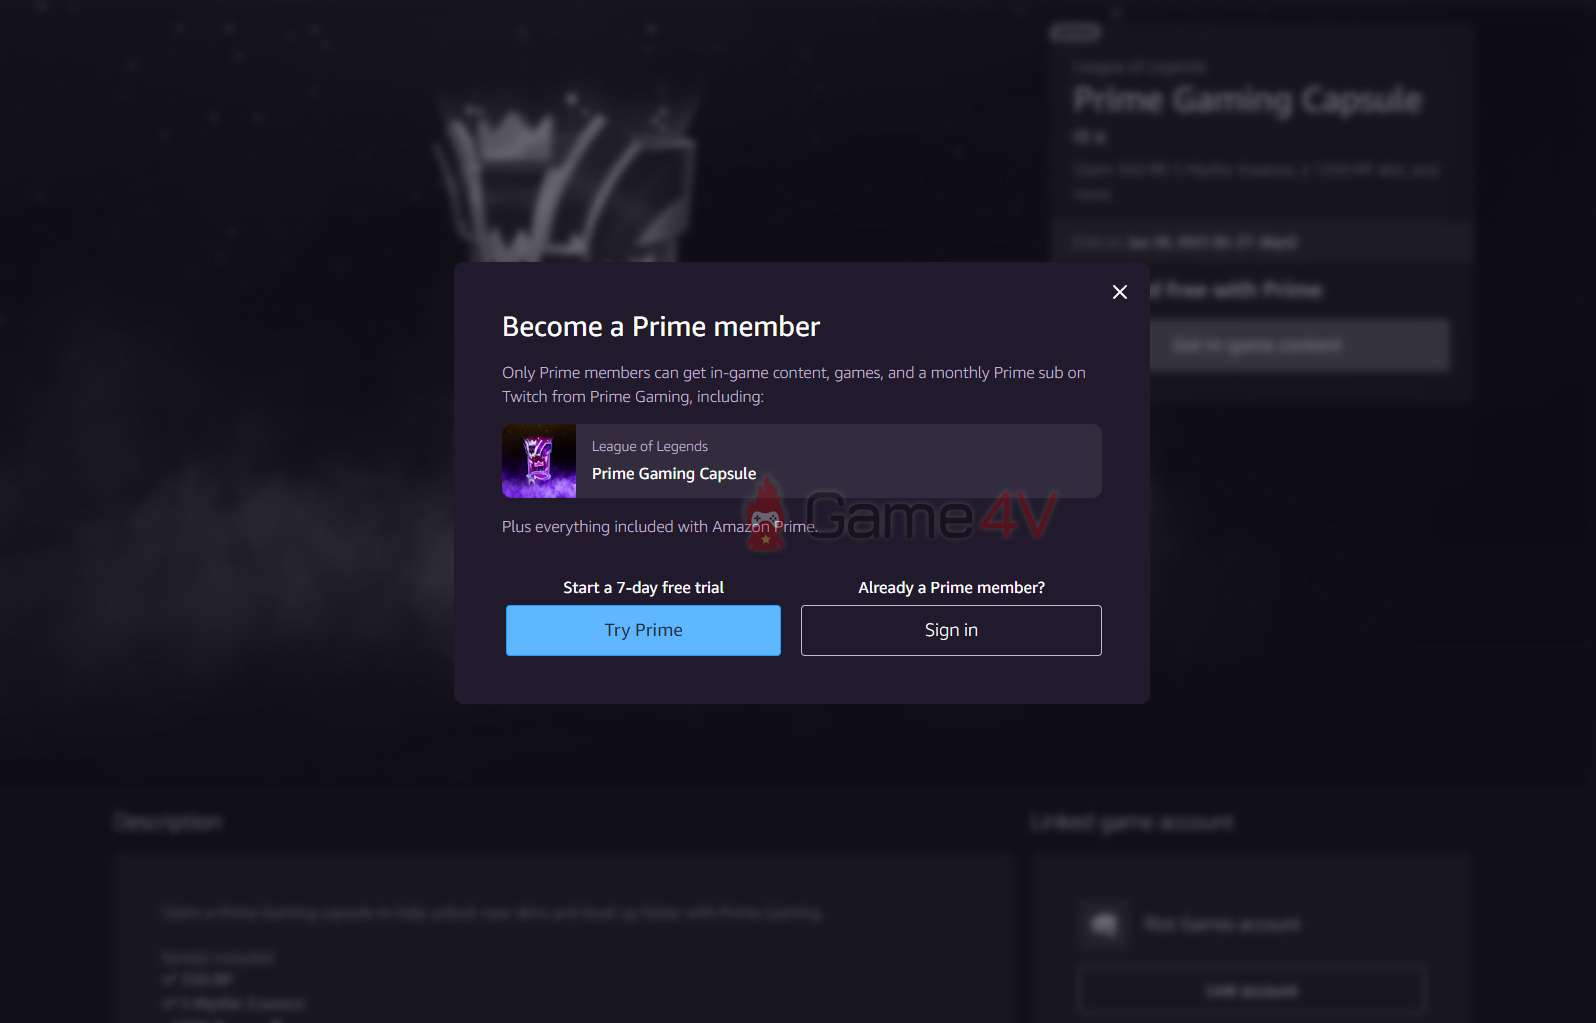 Select "Try Prime".